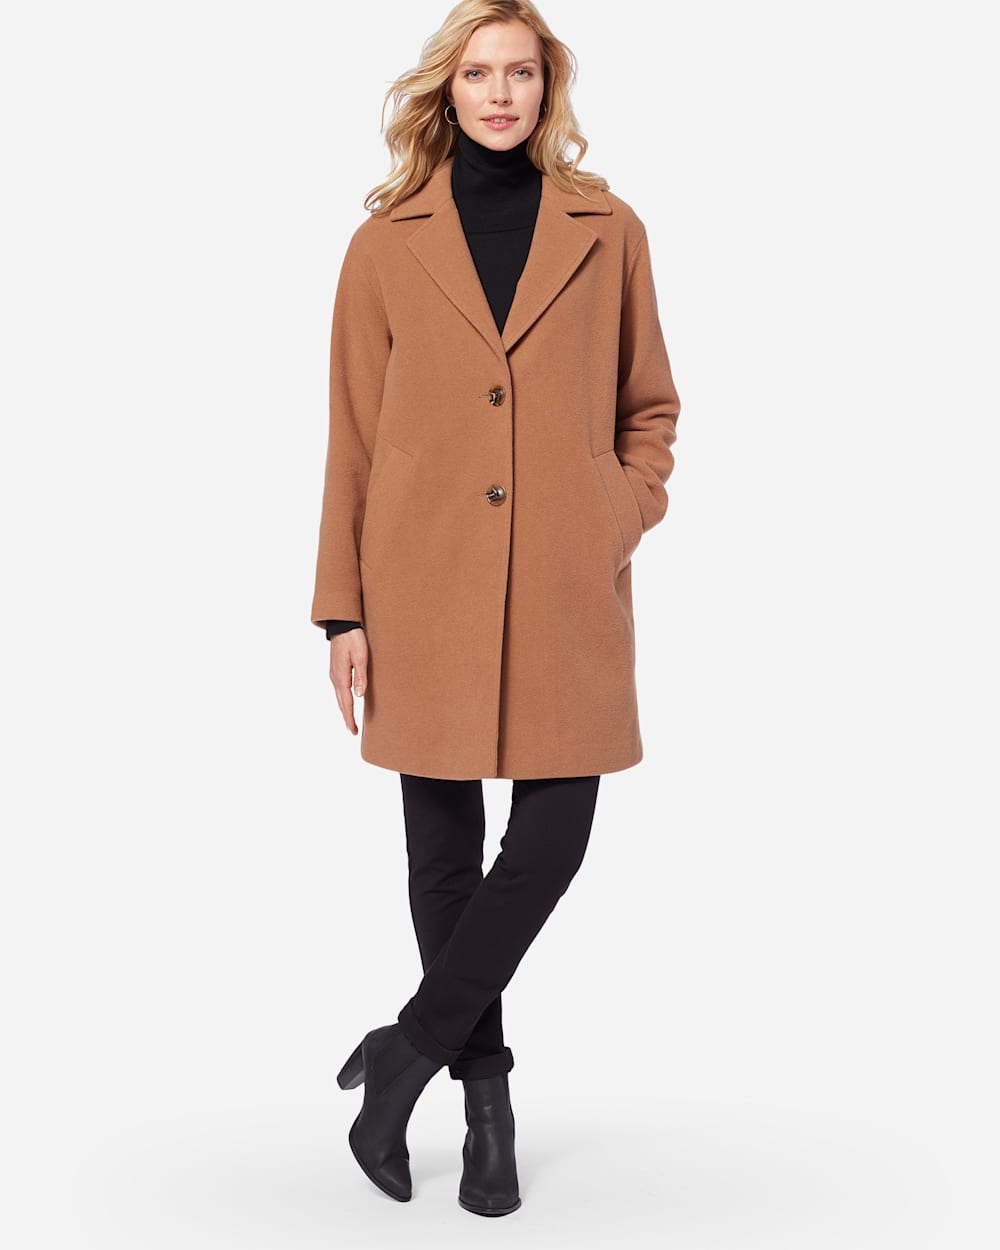 ADDITIONAL VIEW OF WOMEN'S TWO-BUTTON WALKER COAT IN CAMEL image number 2